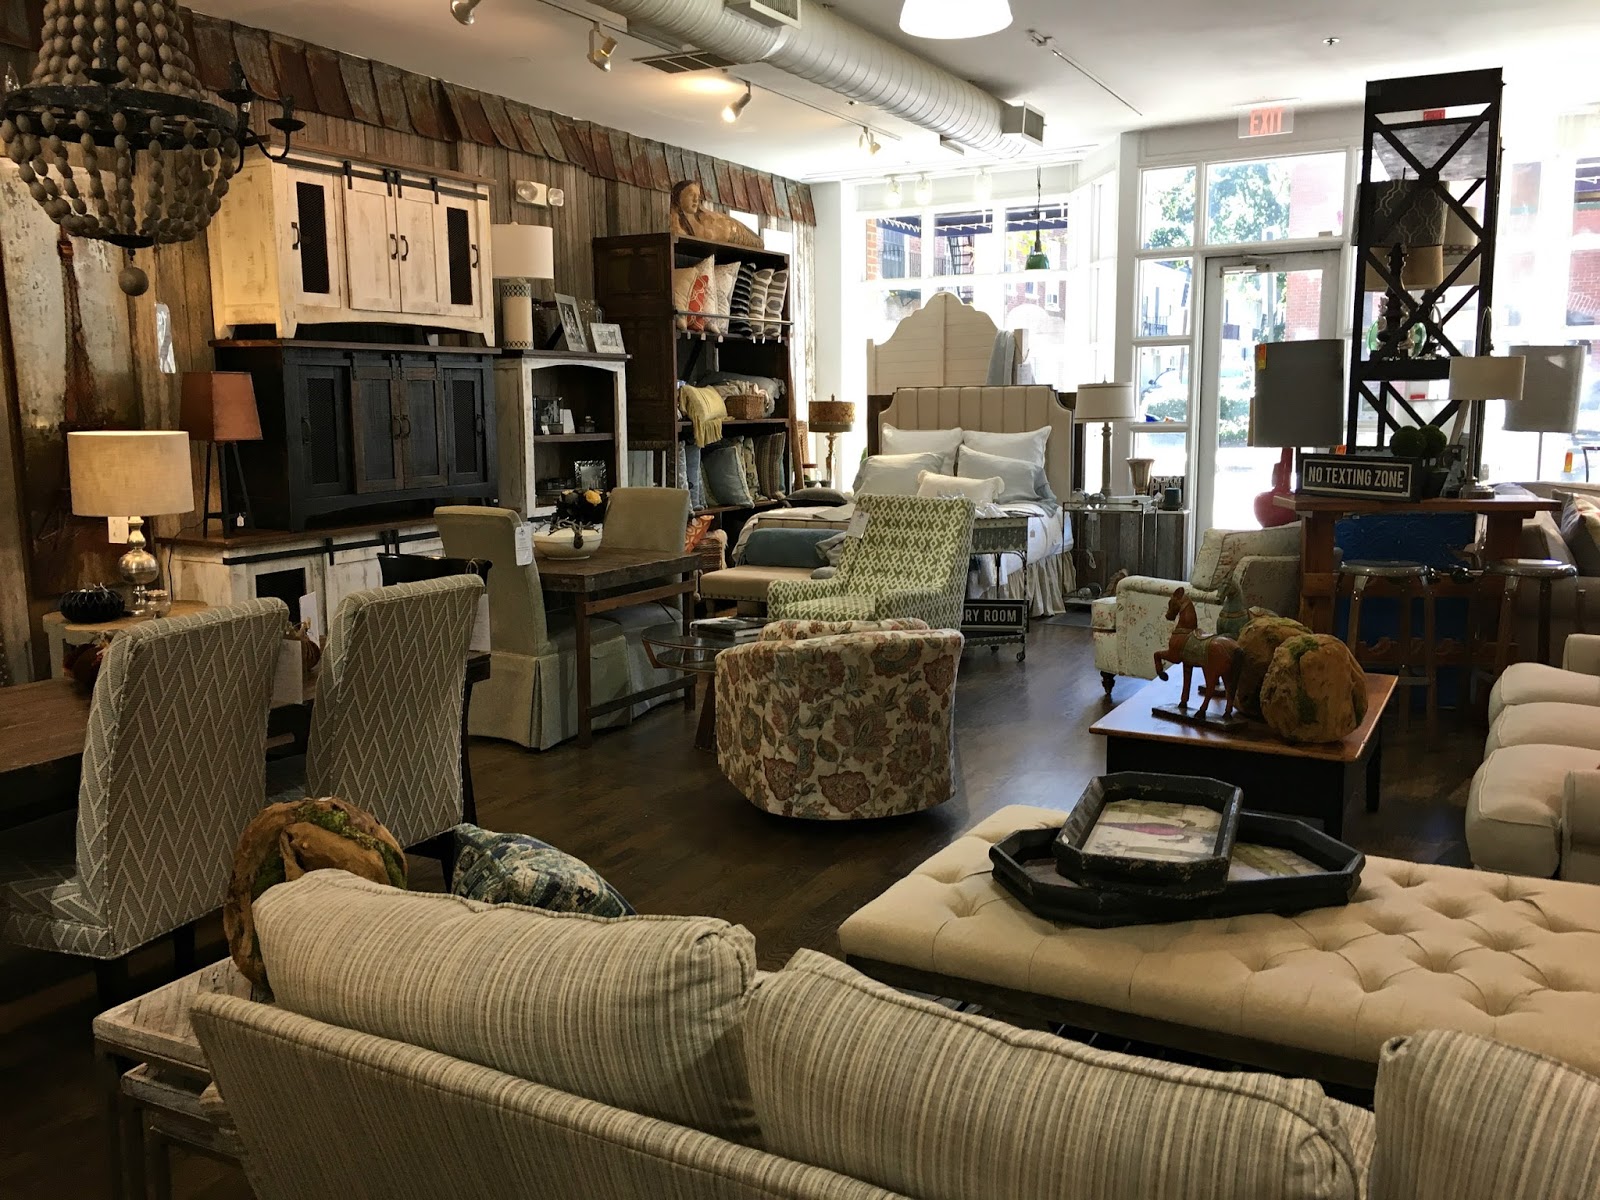 Places to Spend a Fall Day - Homestead store in Princeton